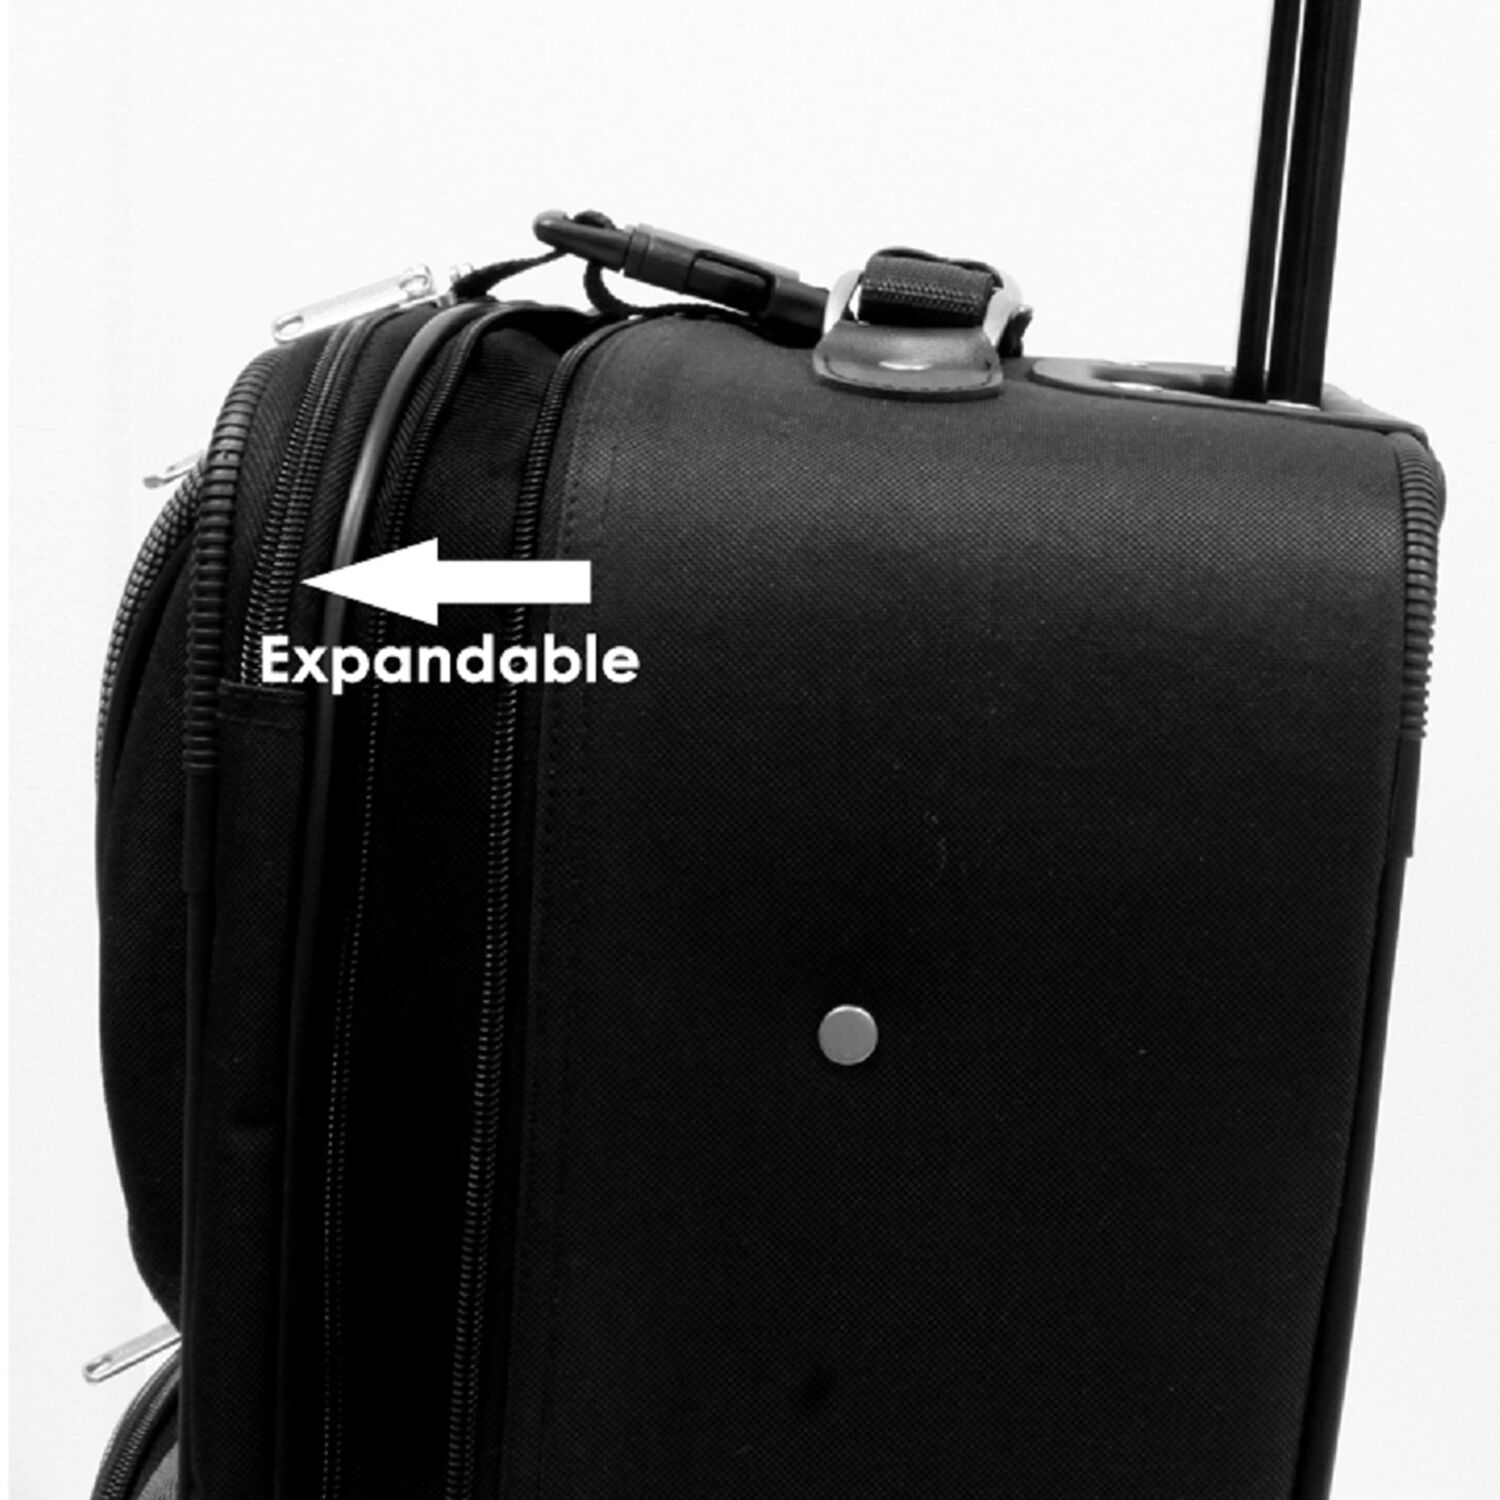 Amsterdam 8-Piece Light Expandable Rolling Luggage Suitcase Tote Bag Travel Set Traveler's Choice TS6950G-XX, TS6950N-XX, TS6950O-XX, TS6950R-XX - фотография #3